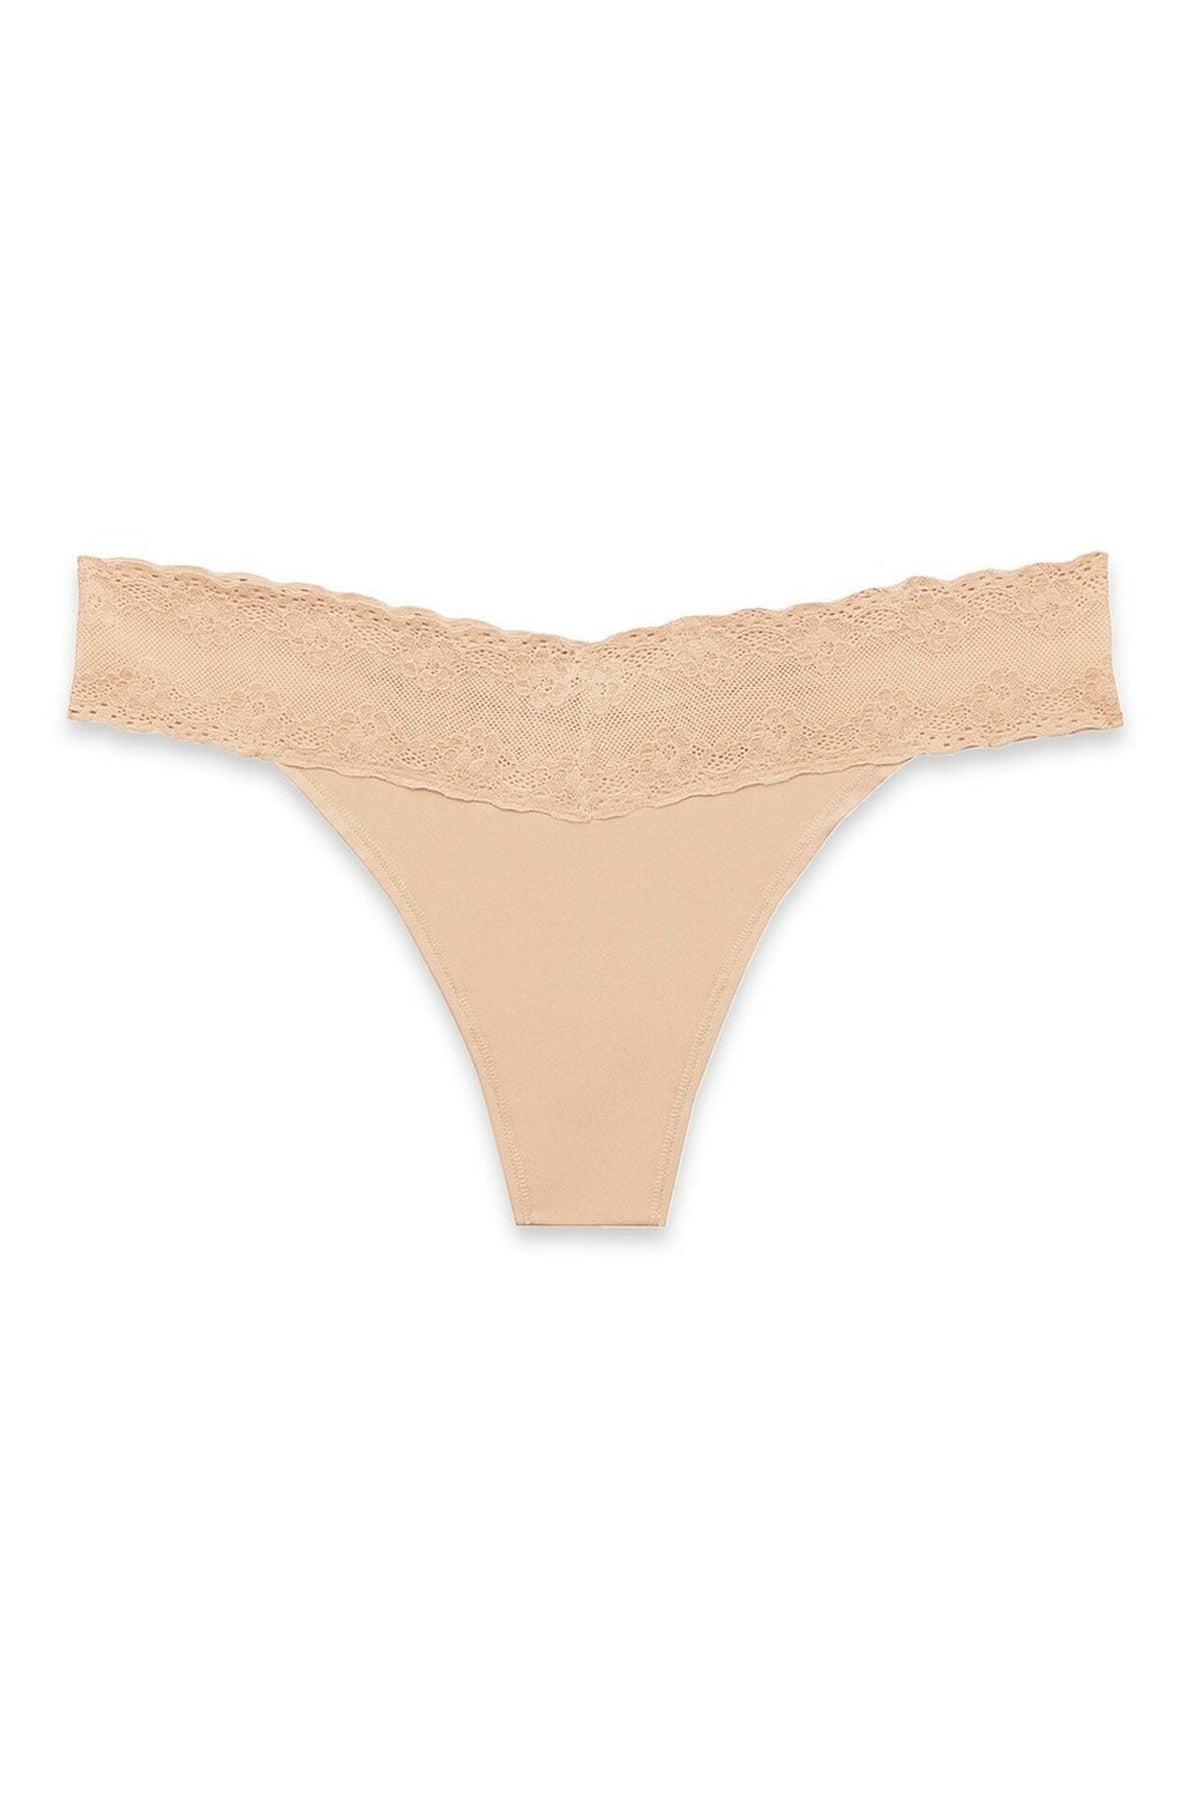 Natori Thongs Cafe / O/S Bliss Perfection One Size Thong - Cafe